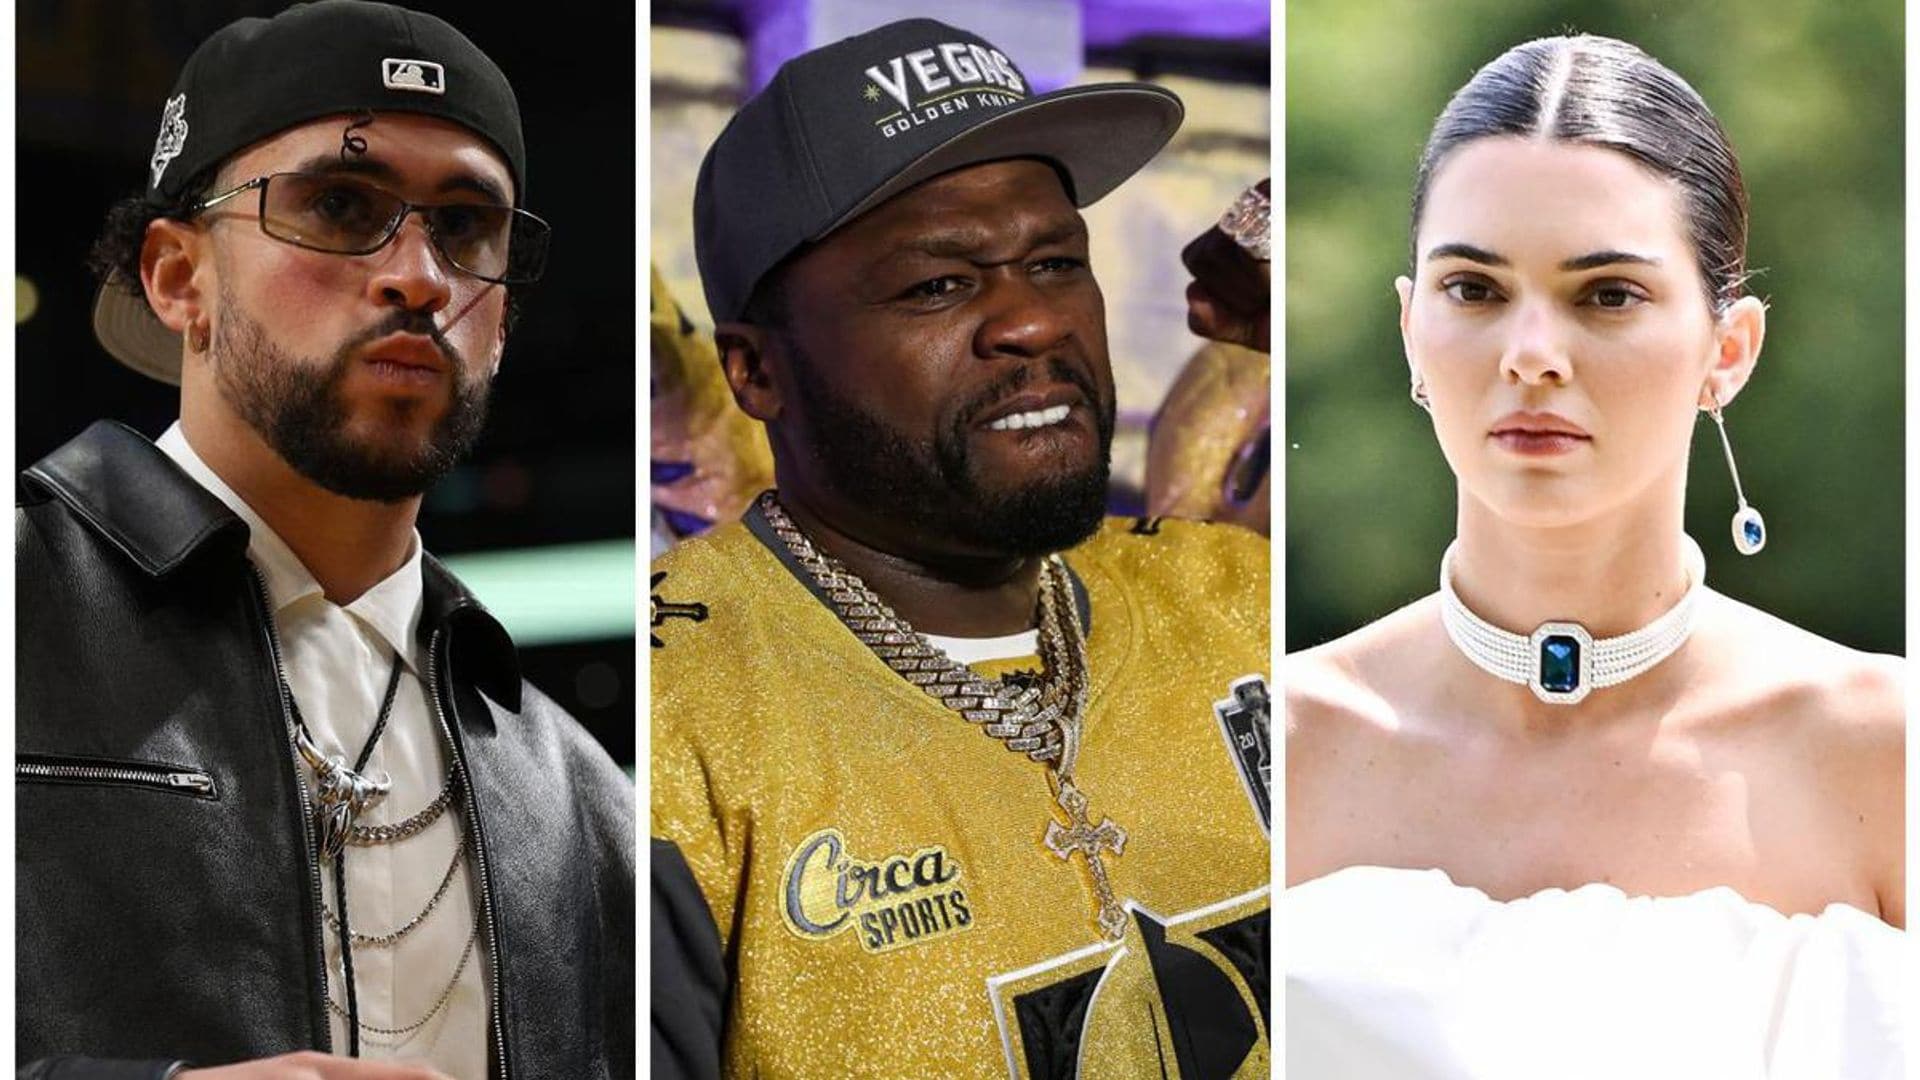 Bad Bunny and Kendall Jenner's surprise concert attendance leaves 50 Cent upset